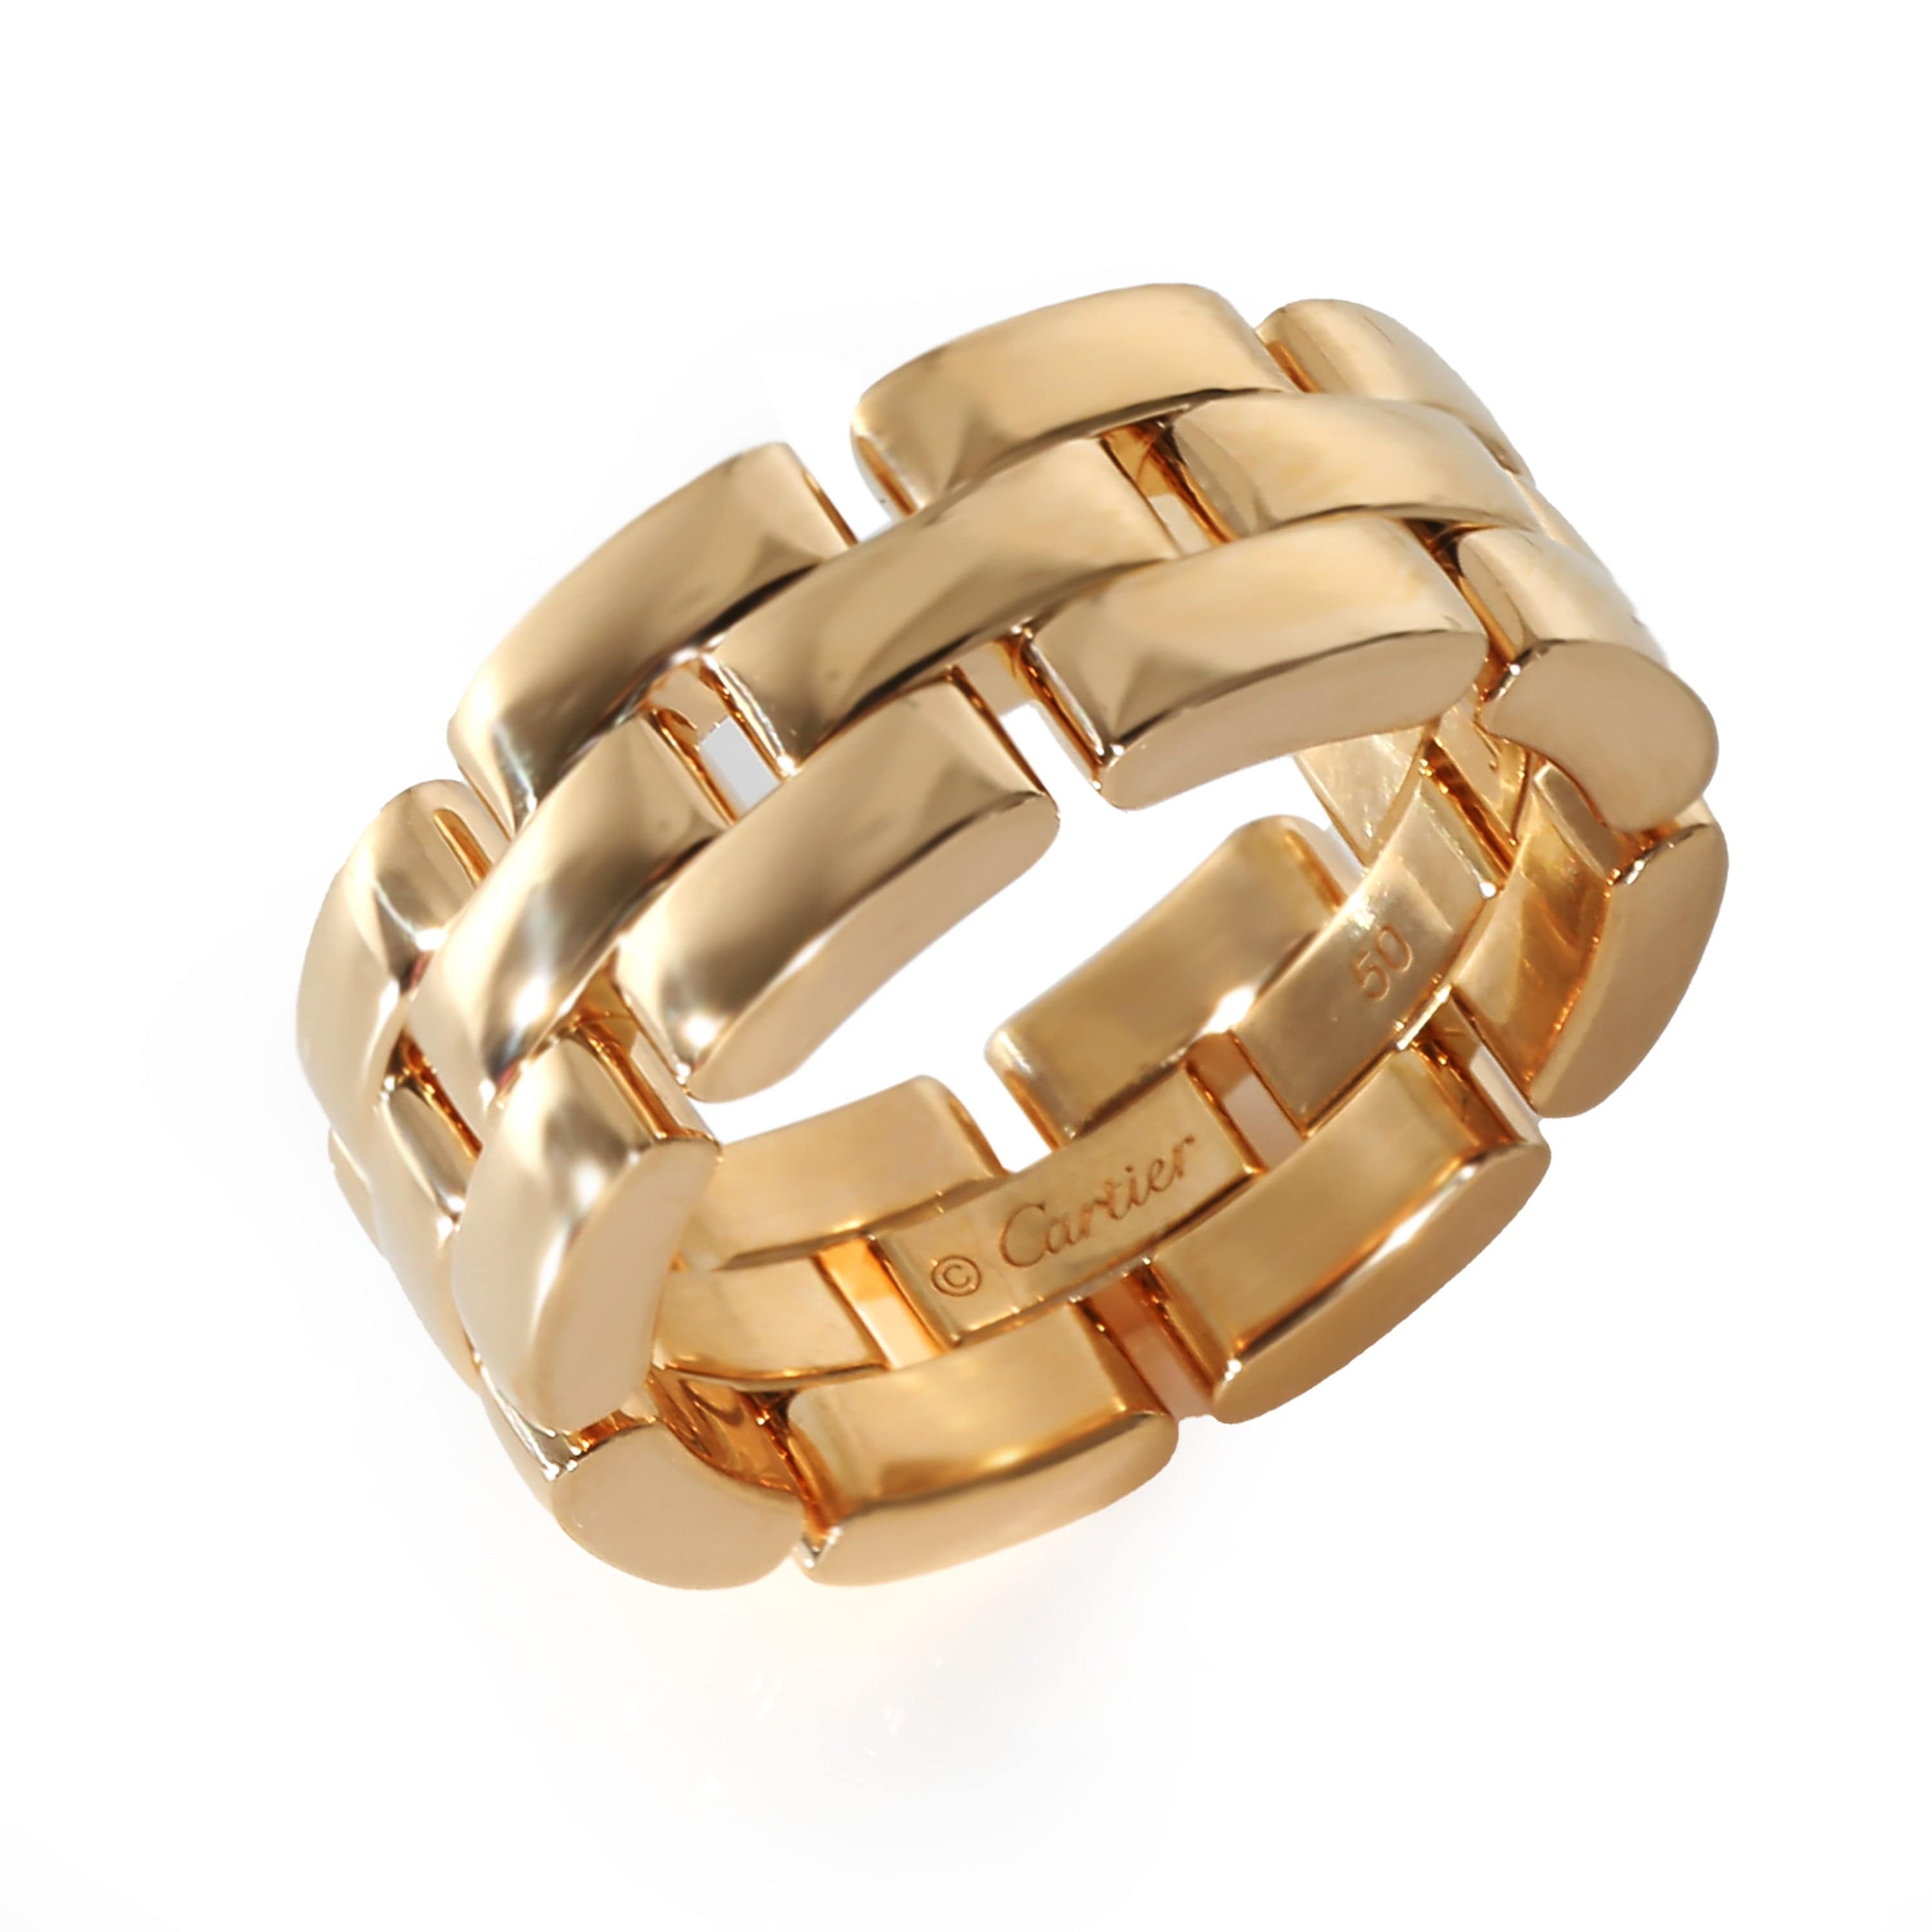 Cartier Cartier Maillon Panthere Band in 18k Yellow Gold